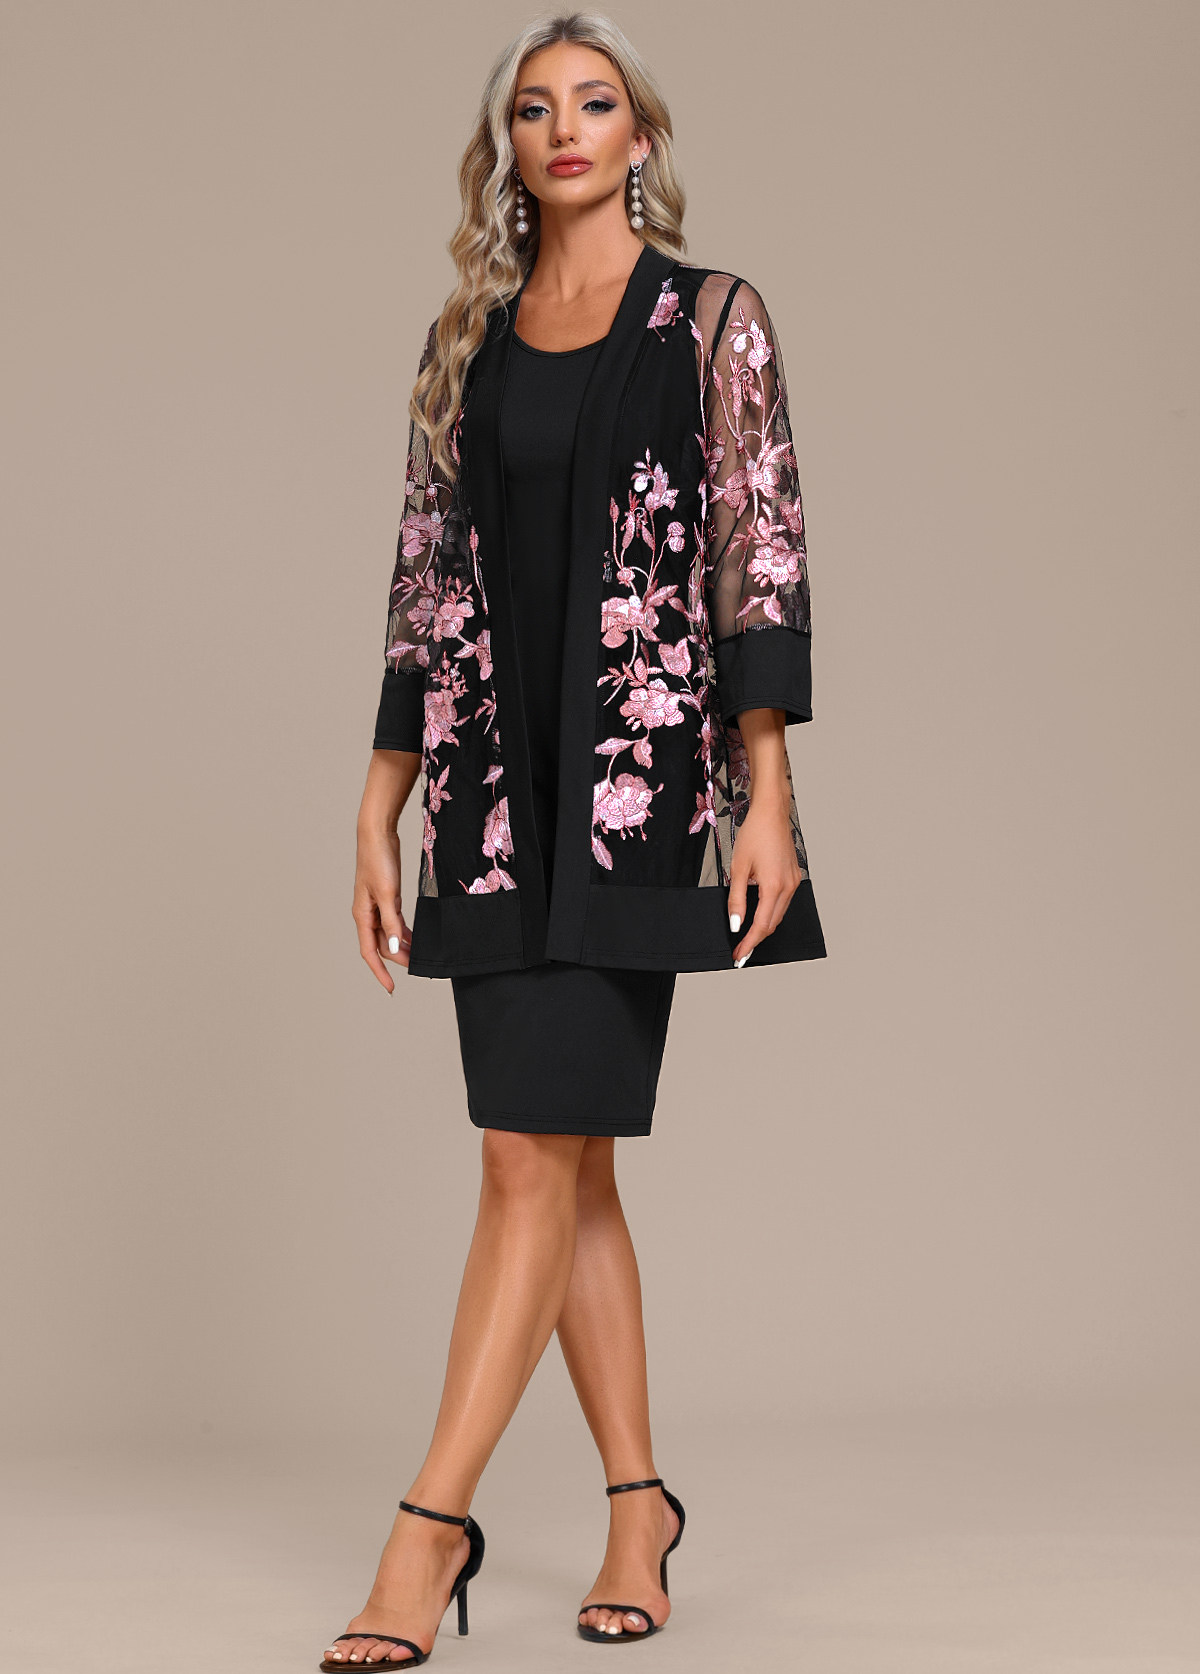 Two Piece Round Neck Black Shift Dress and Cardigan